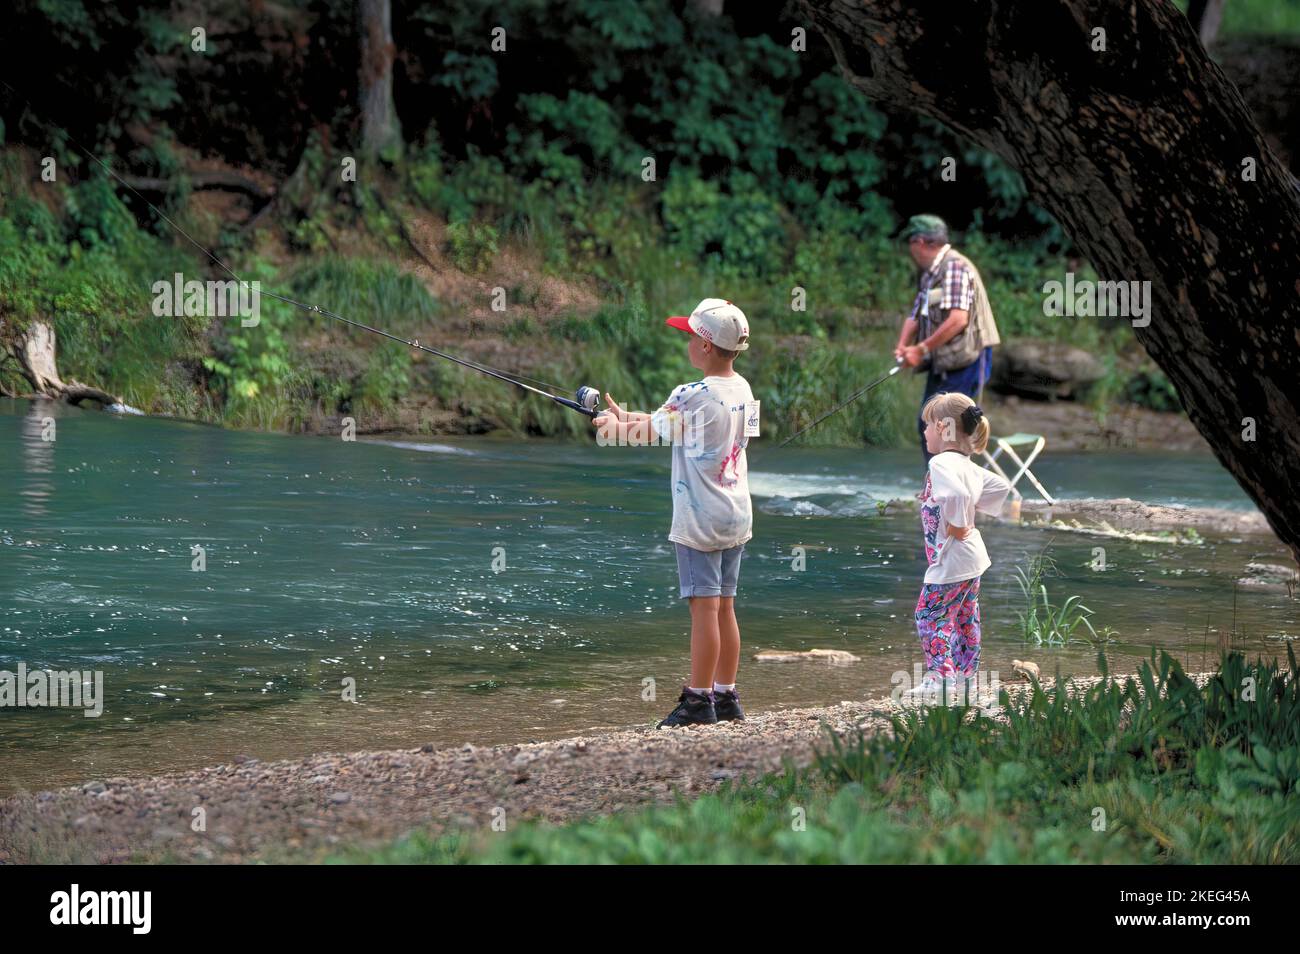 A little girl watches her big brother fish while their grandfather casts in the background at Roaring River State Park in Missouri. Stock Photo